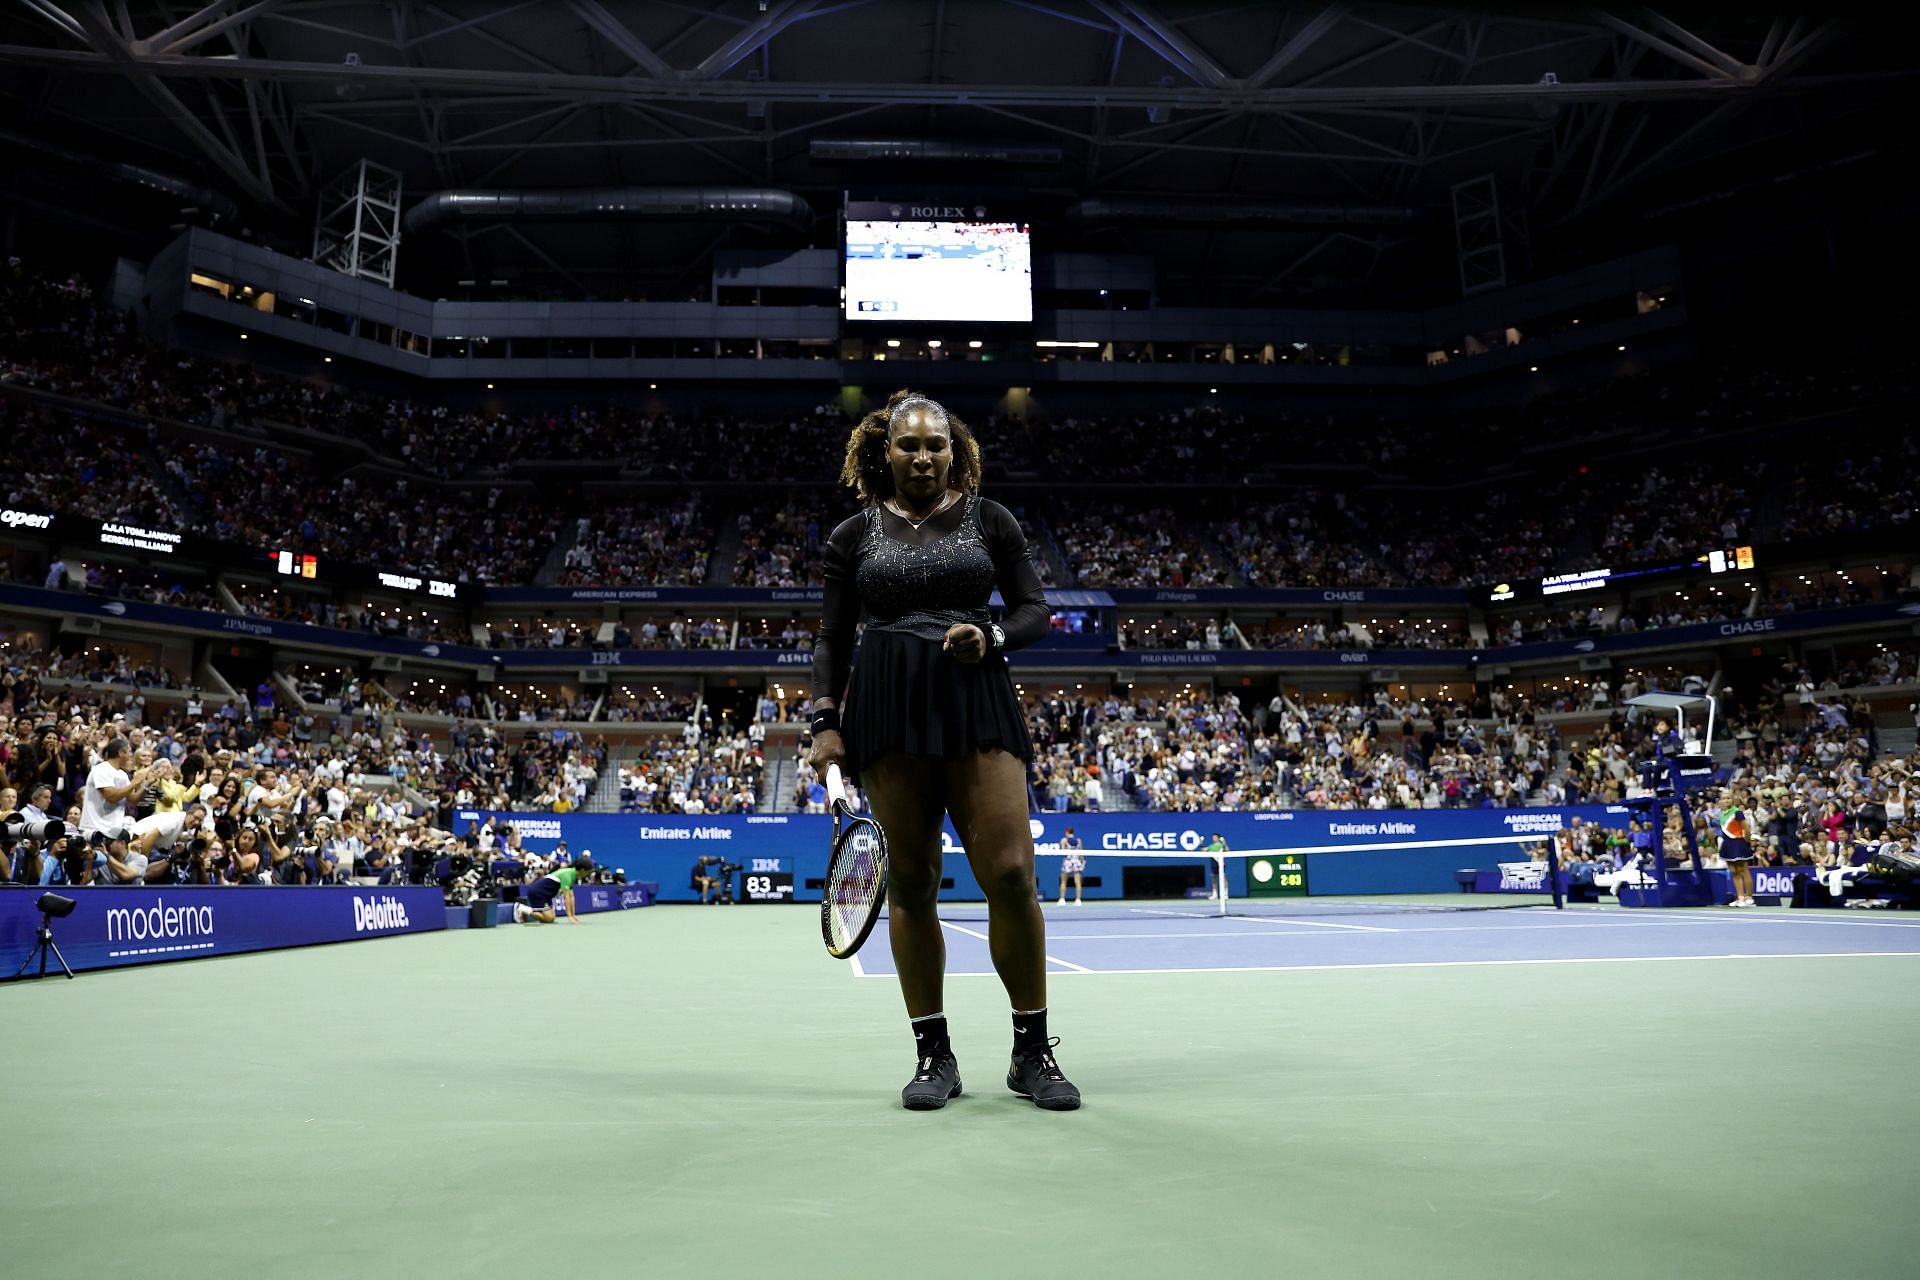 Serena Williams during the last match of her career against Ajla Tomljanovic at the US Open